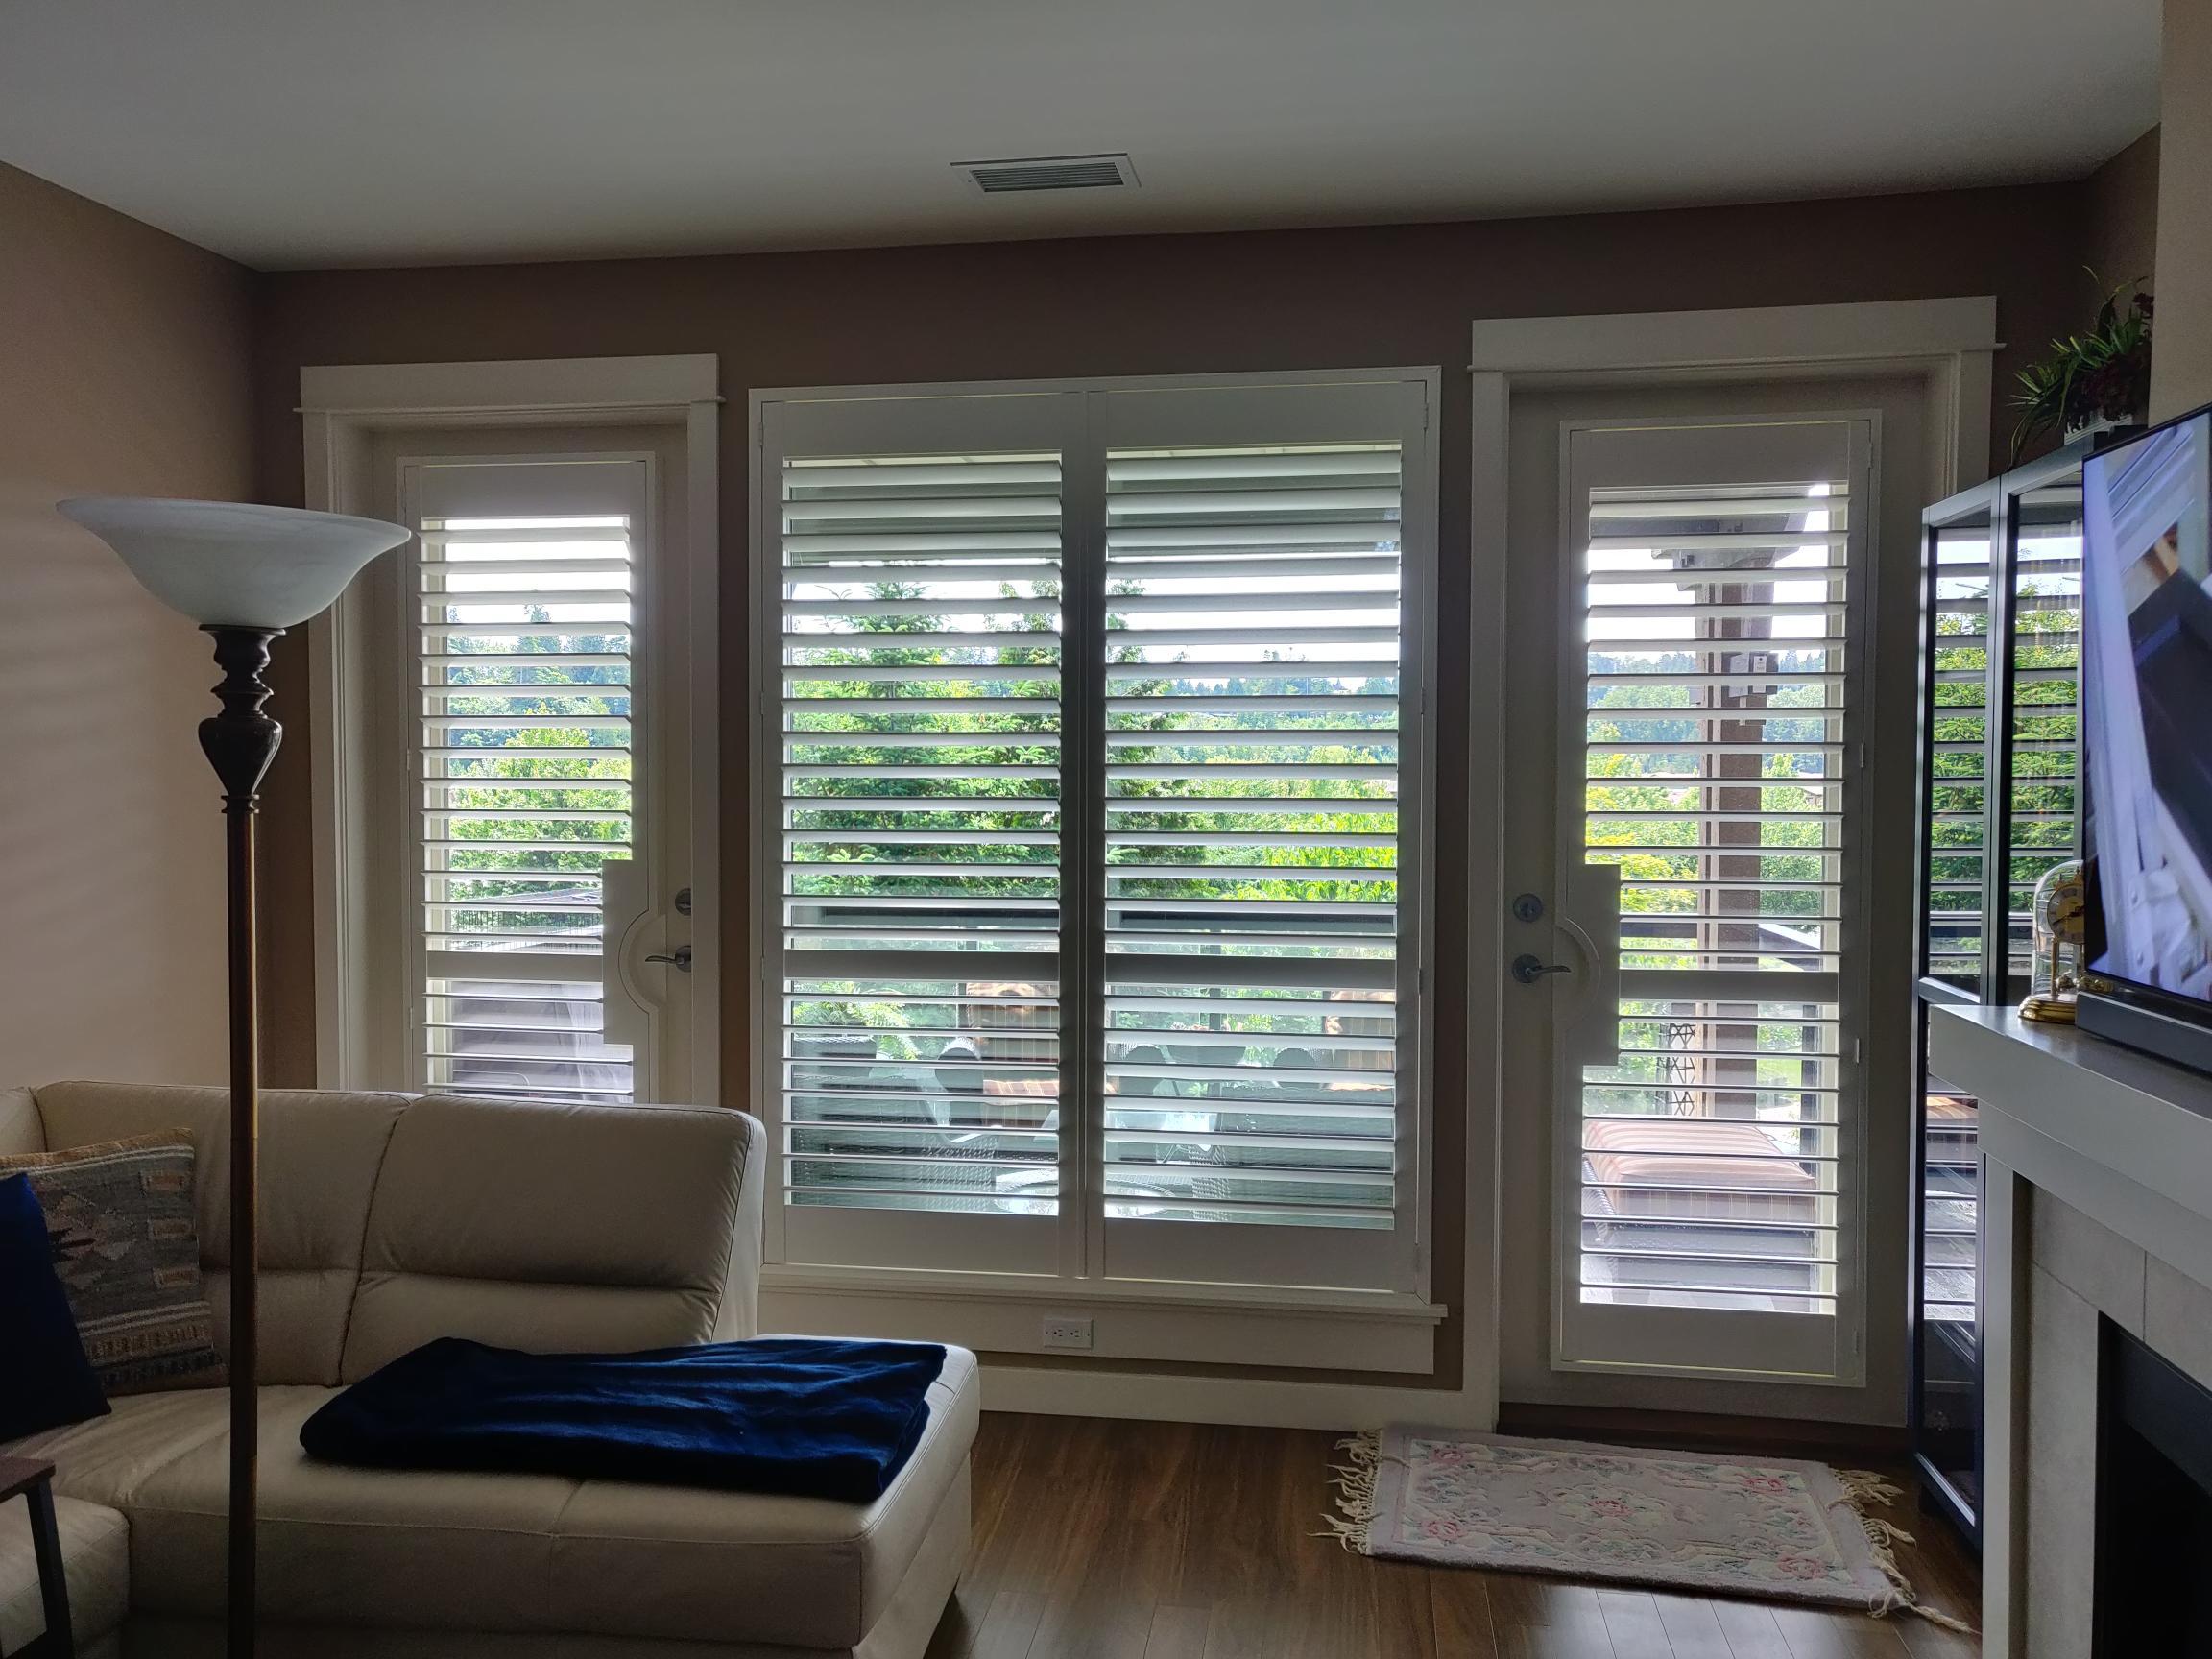 Custom Door and Slider Shutters Budget Blinds of Comox Valley and Campbell River Courtenay (250)338-8564